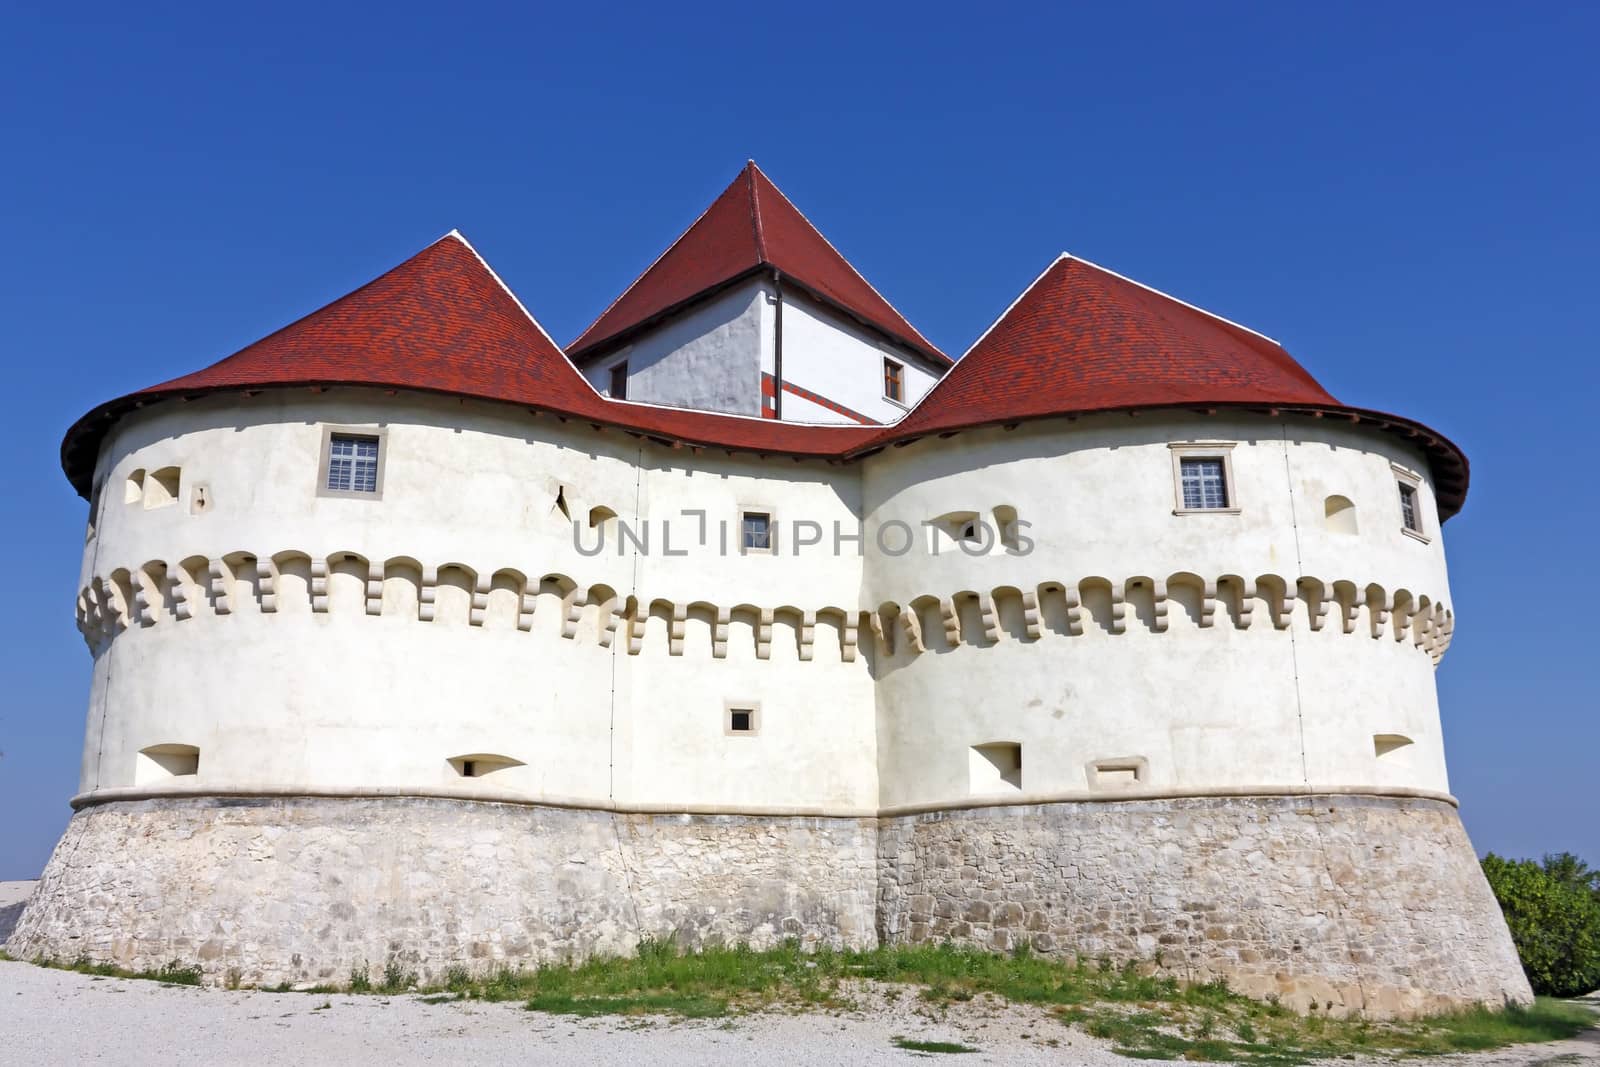 Veliki Tabor, fortress and museum in northwest Croatia, dating from the 12th century